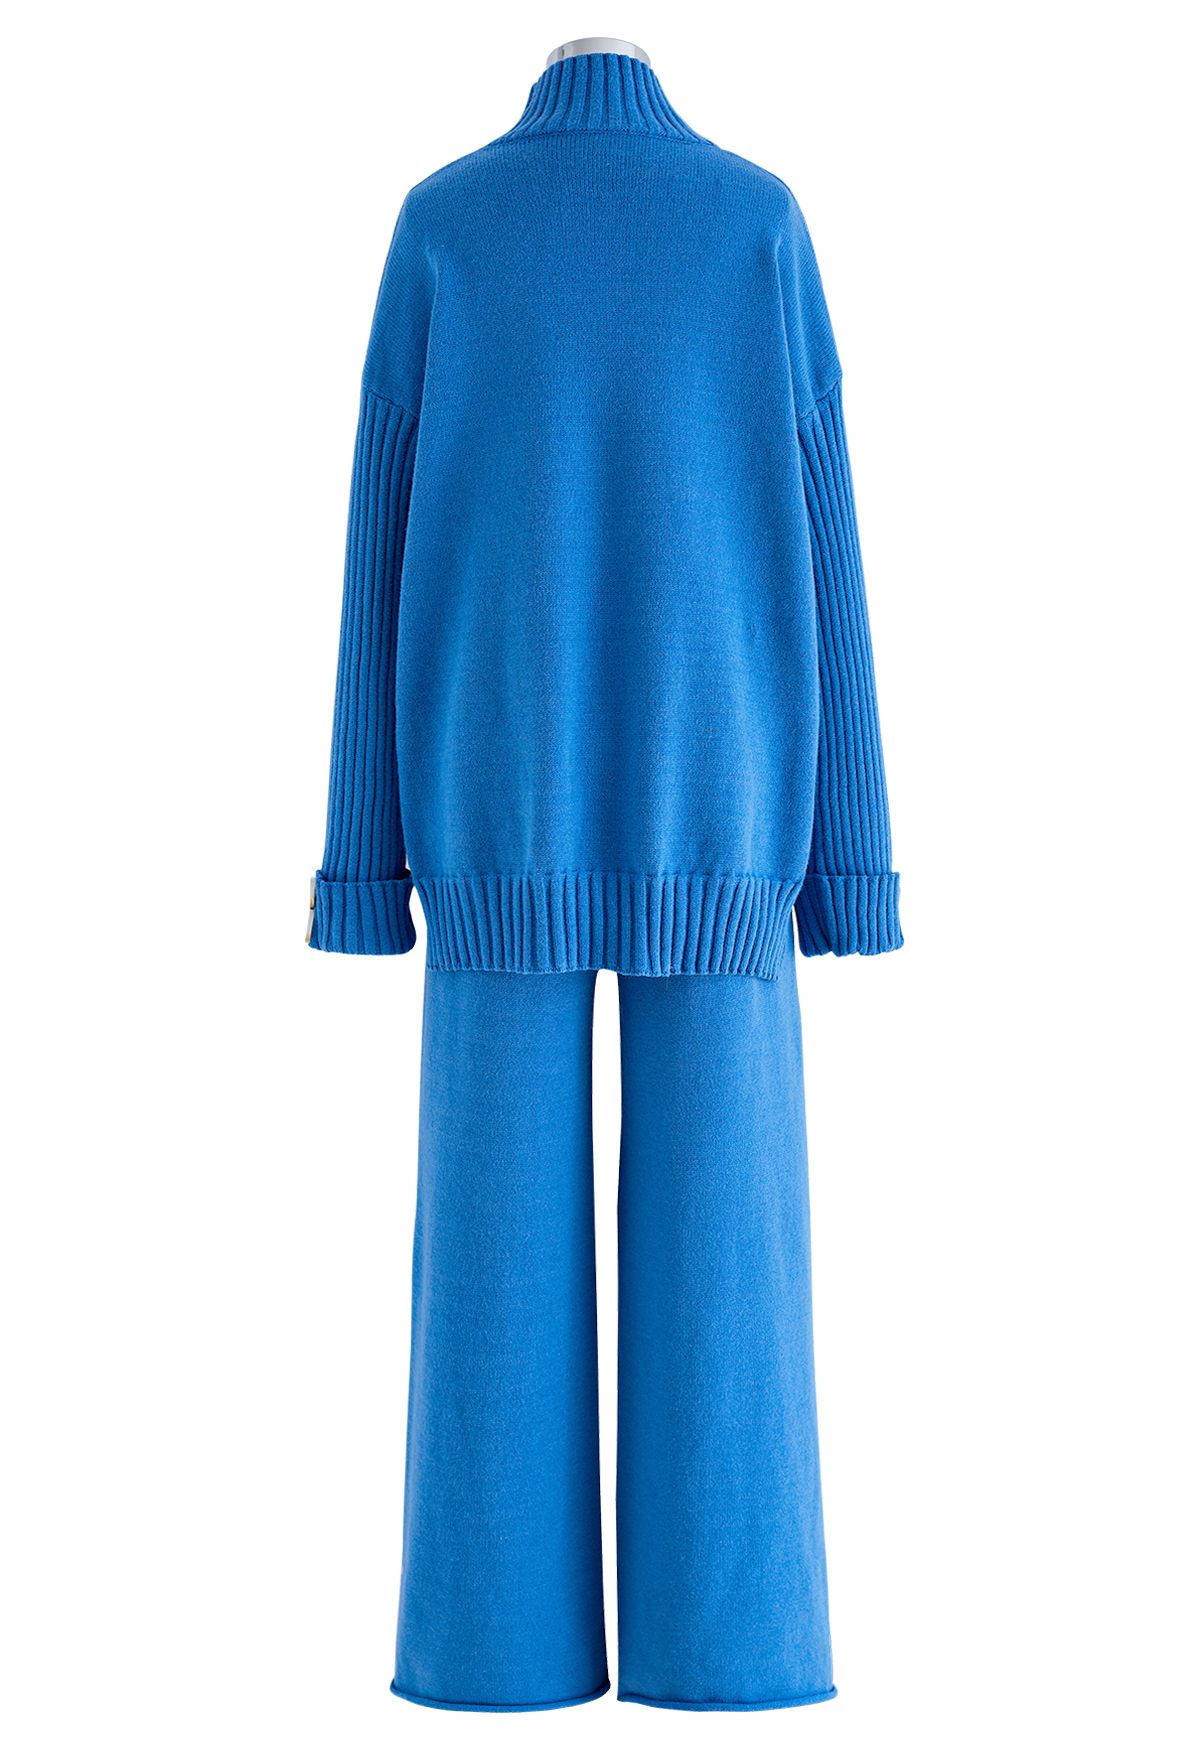 High Neck Buttoned Cuff Sweater and Knit Pants Set in Blue - Retro